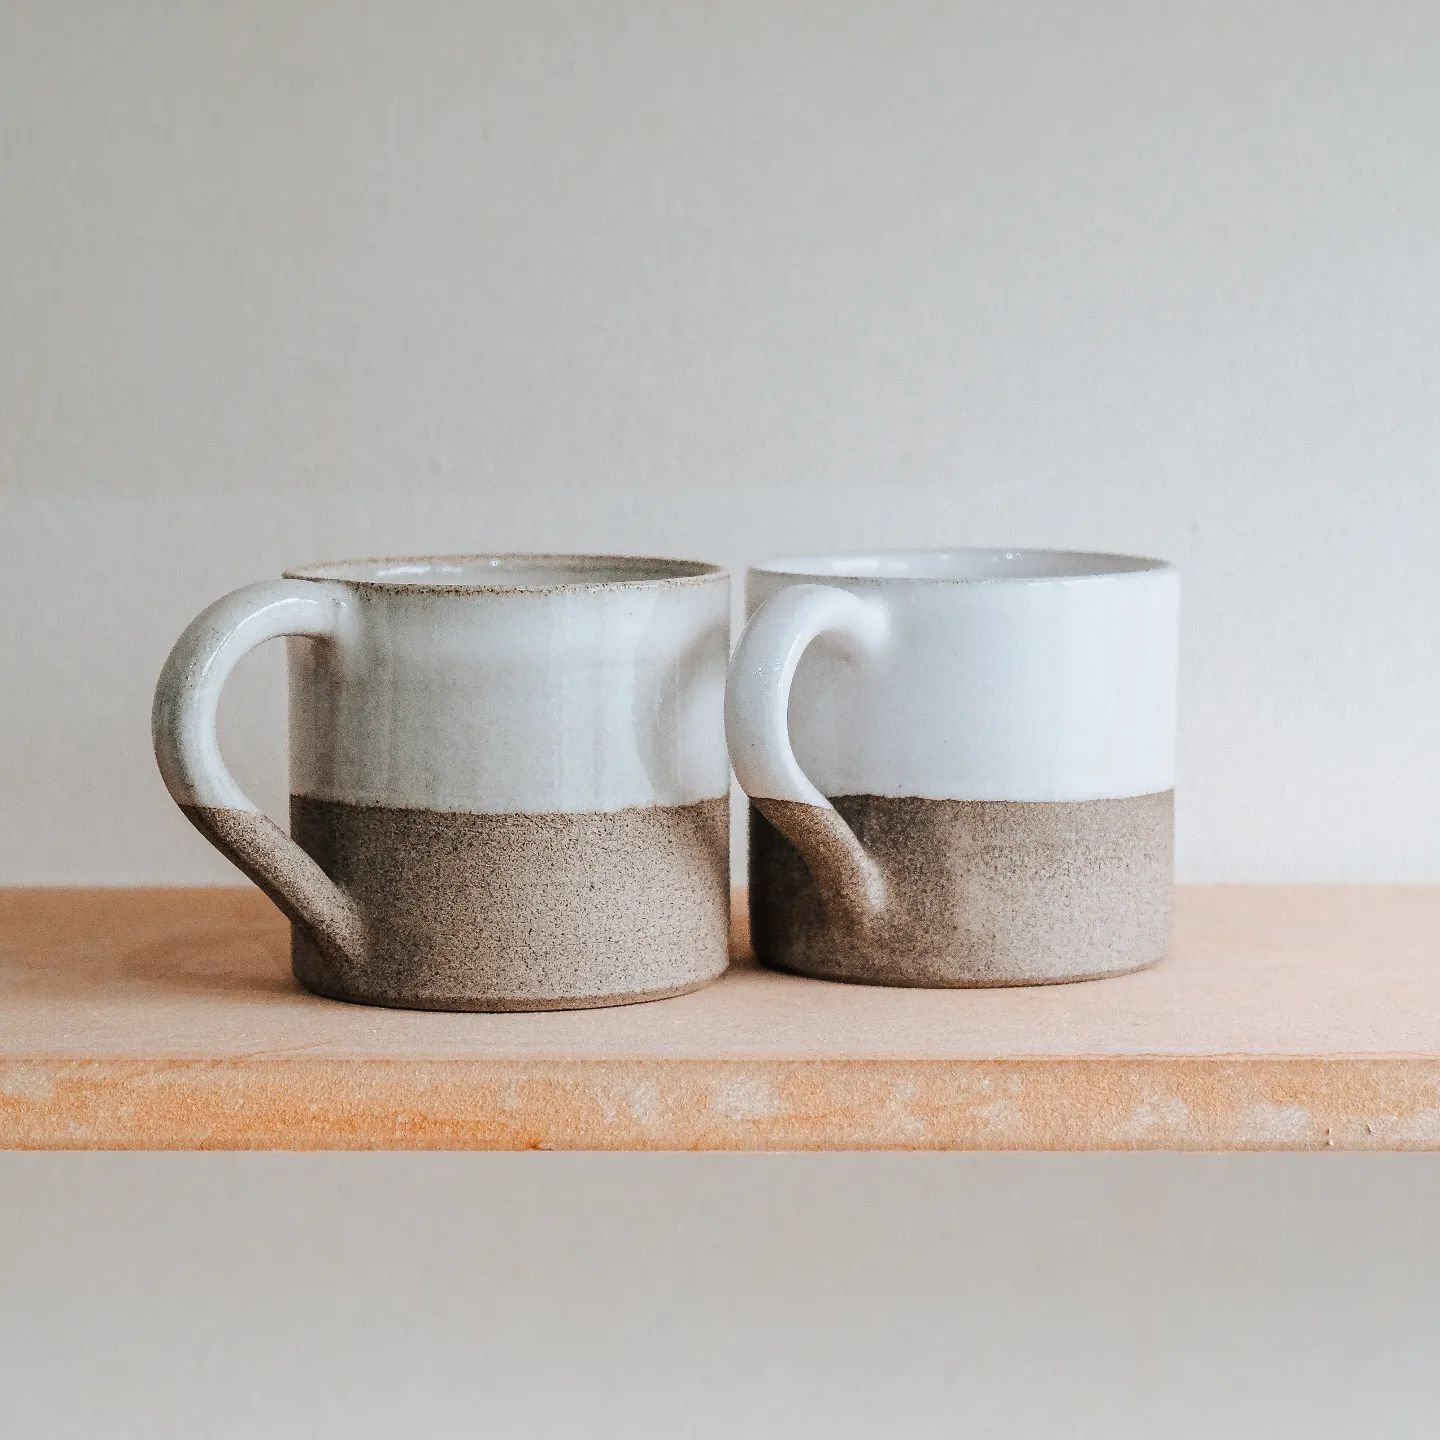 New Batch 🏴󠁧󠁢󠁷󠁬󠁳󠁿 In my hometown of Bridgend (Pen-y-bont), Beth runs The Station, a lovely shop centred around community. Inspired by the stone walls of the local pubs, these mugs feature a classic handle, white washed texture, and are generou